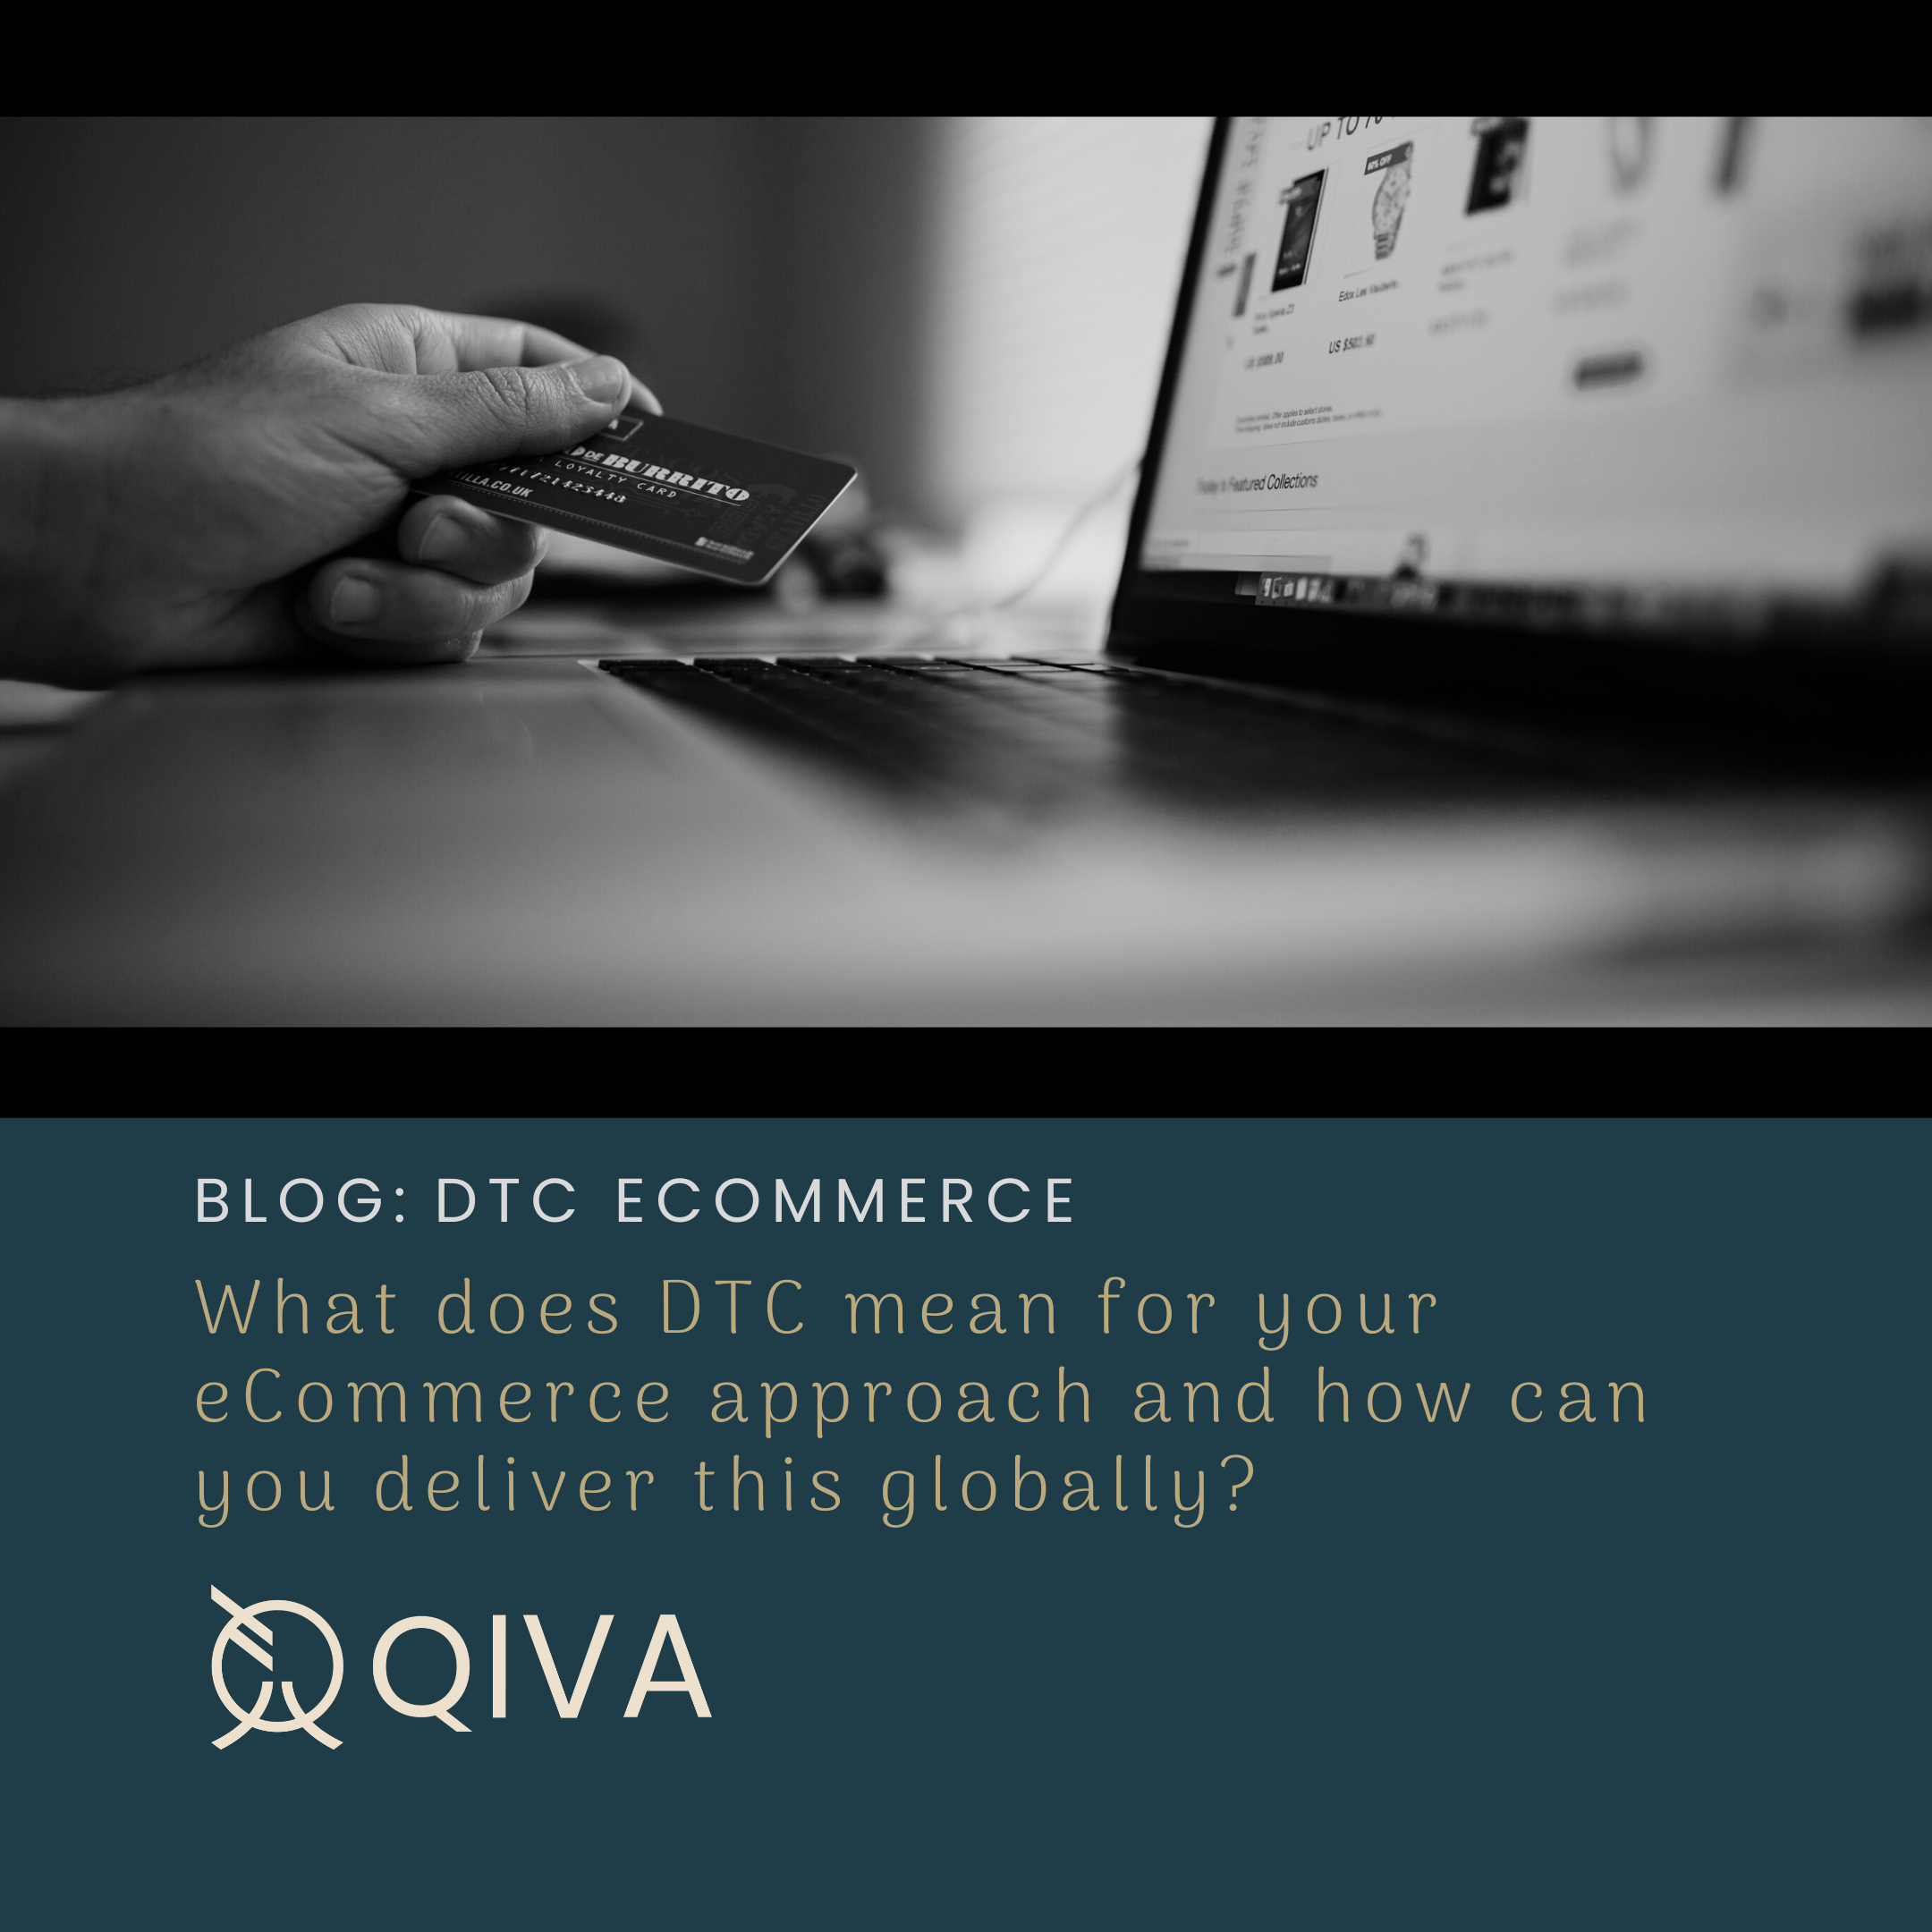 What does DTC mean for your eCommerce approach and how can you deliver this globally?